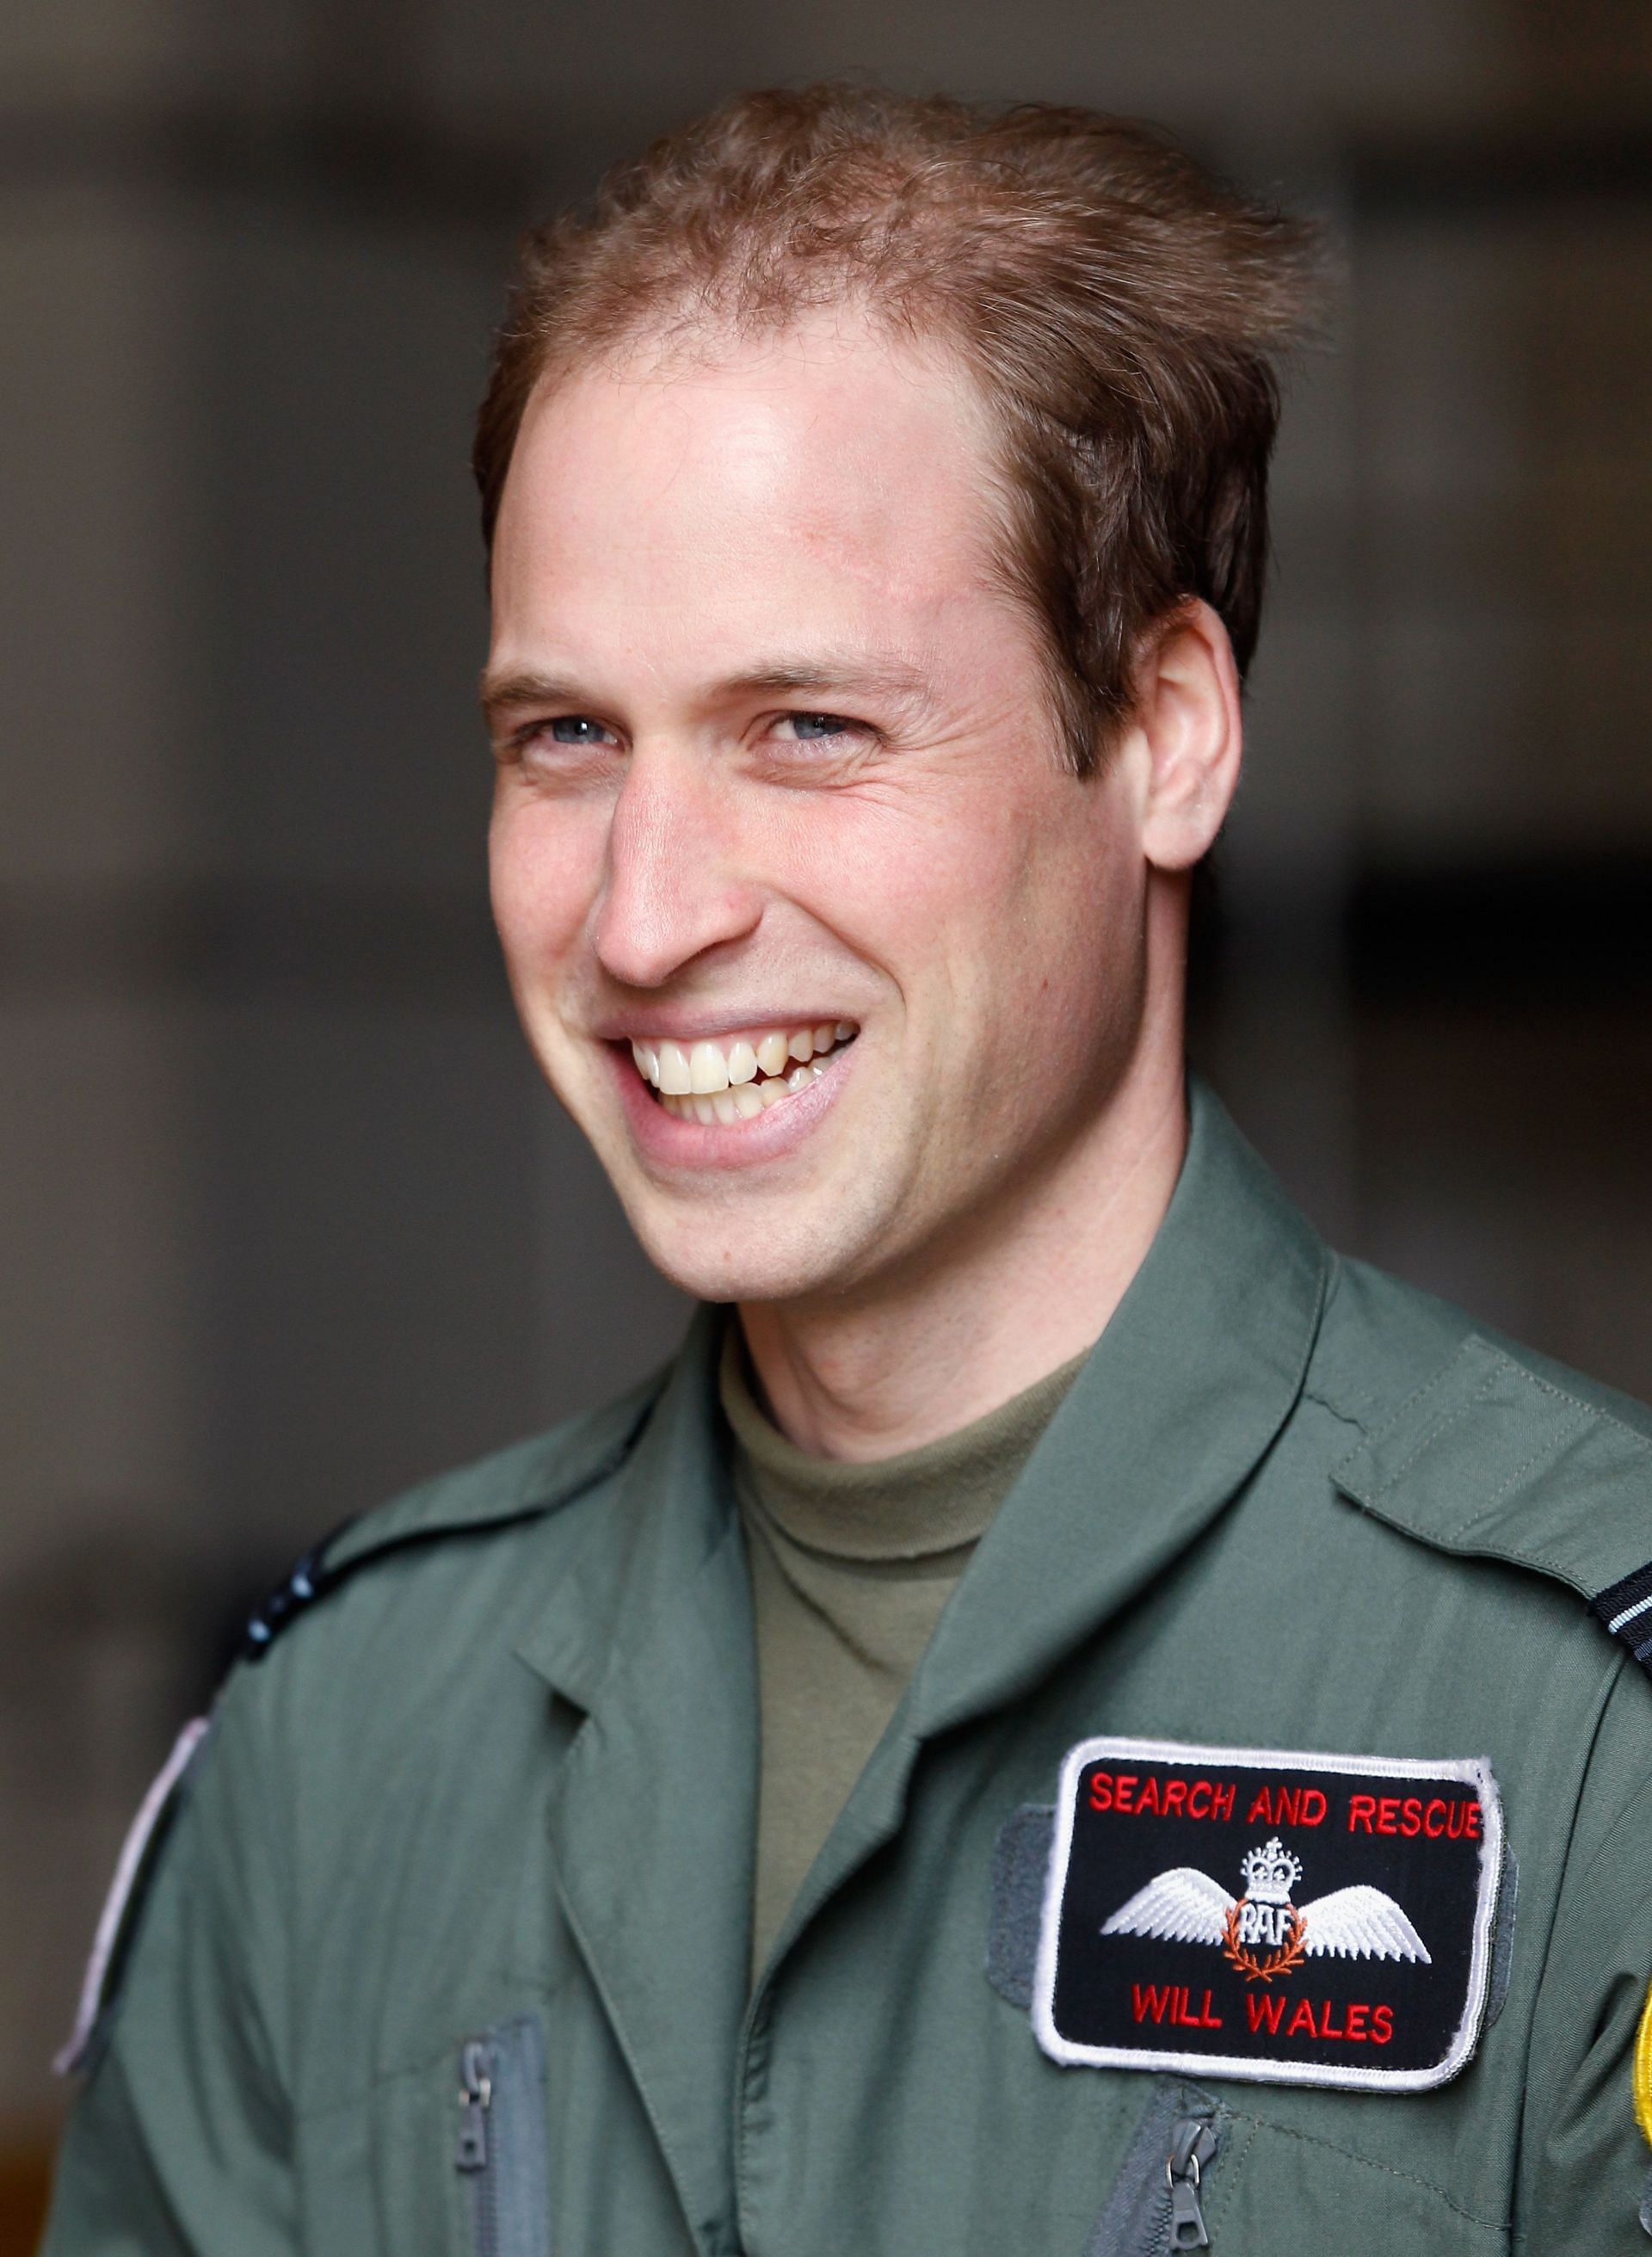 Prince William smiles as he waits for his grandmother, Queen Elizabeth II -  April 1, 2011 (Image via Getty)